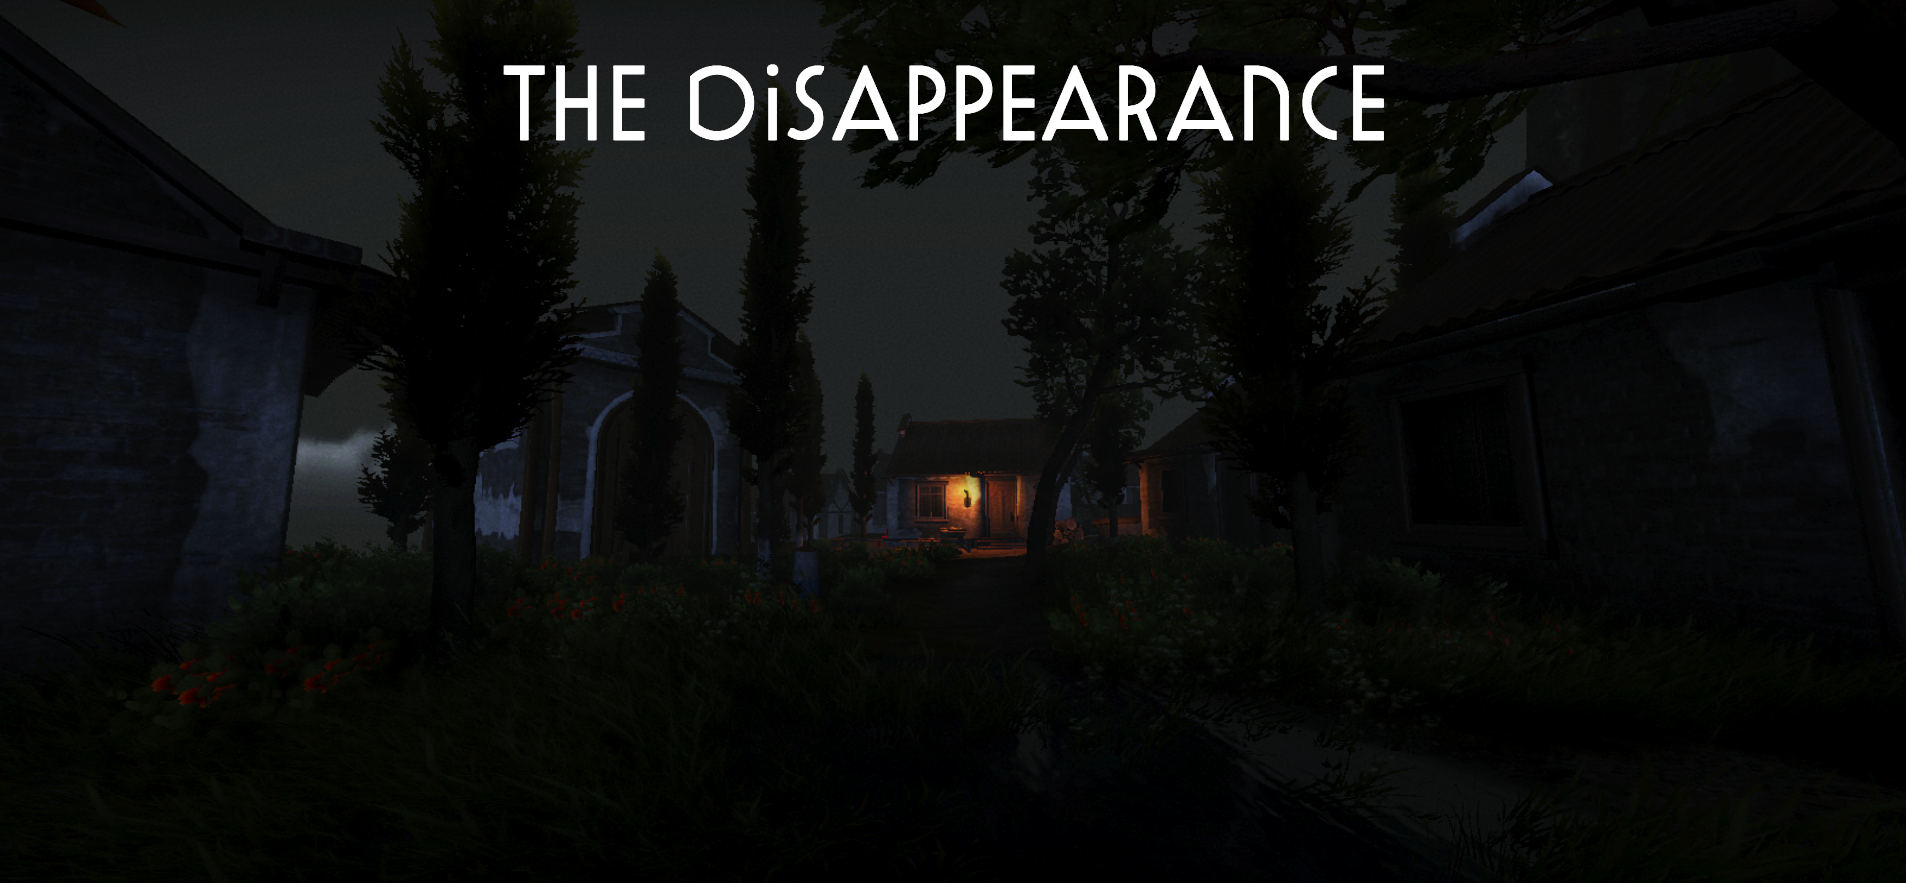 The Disappearance!